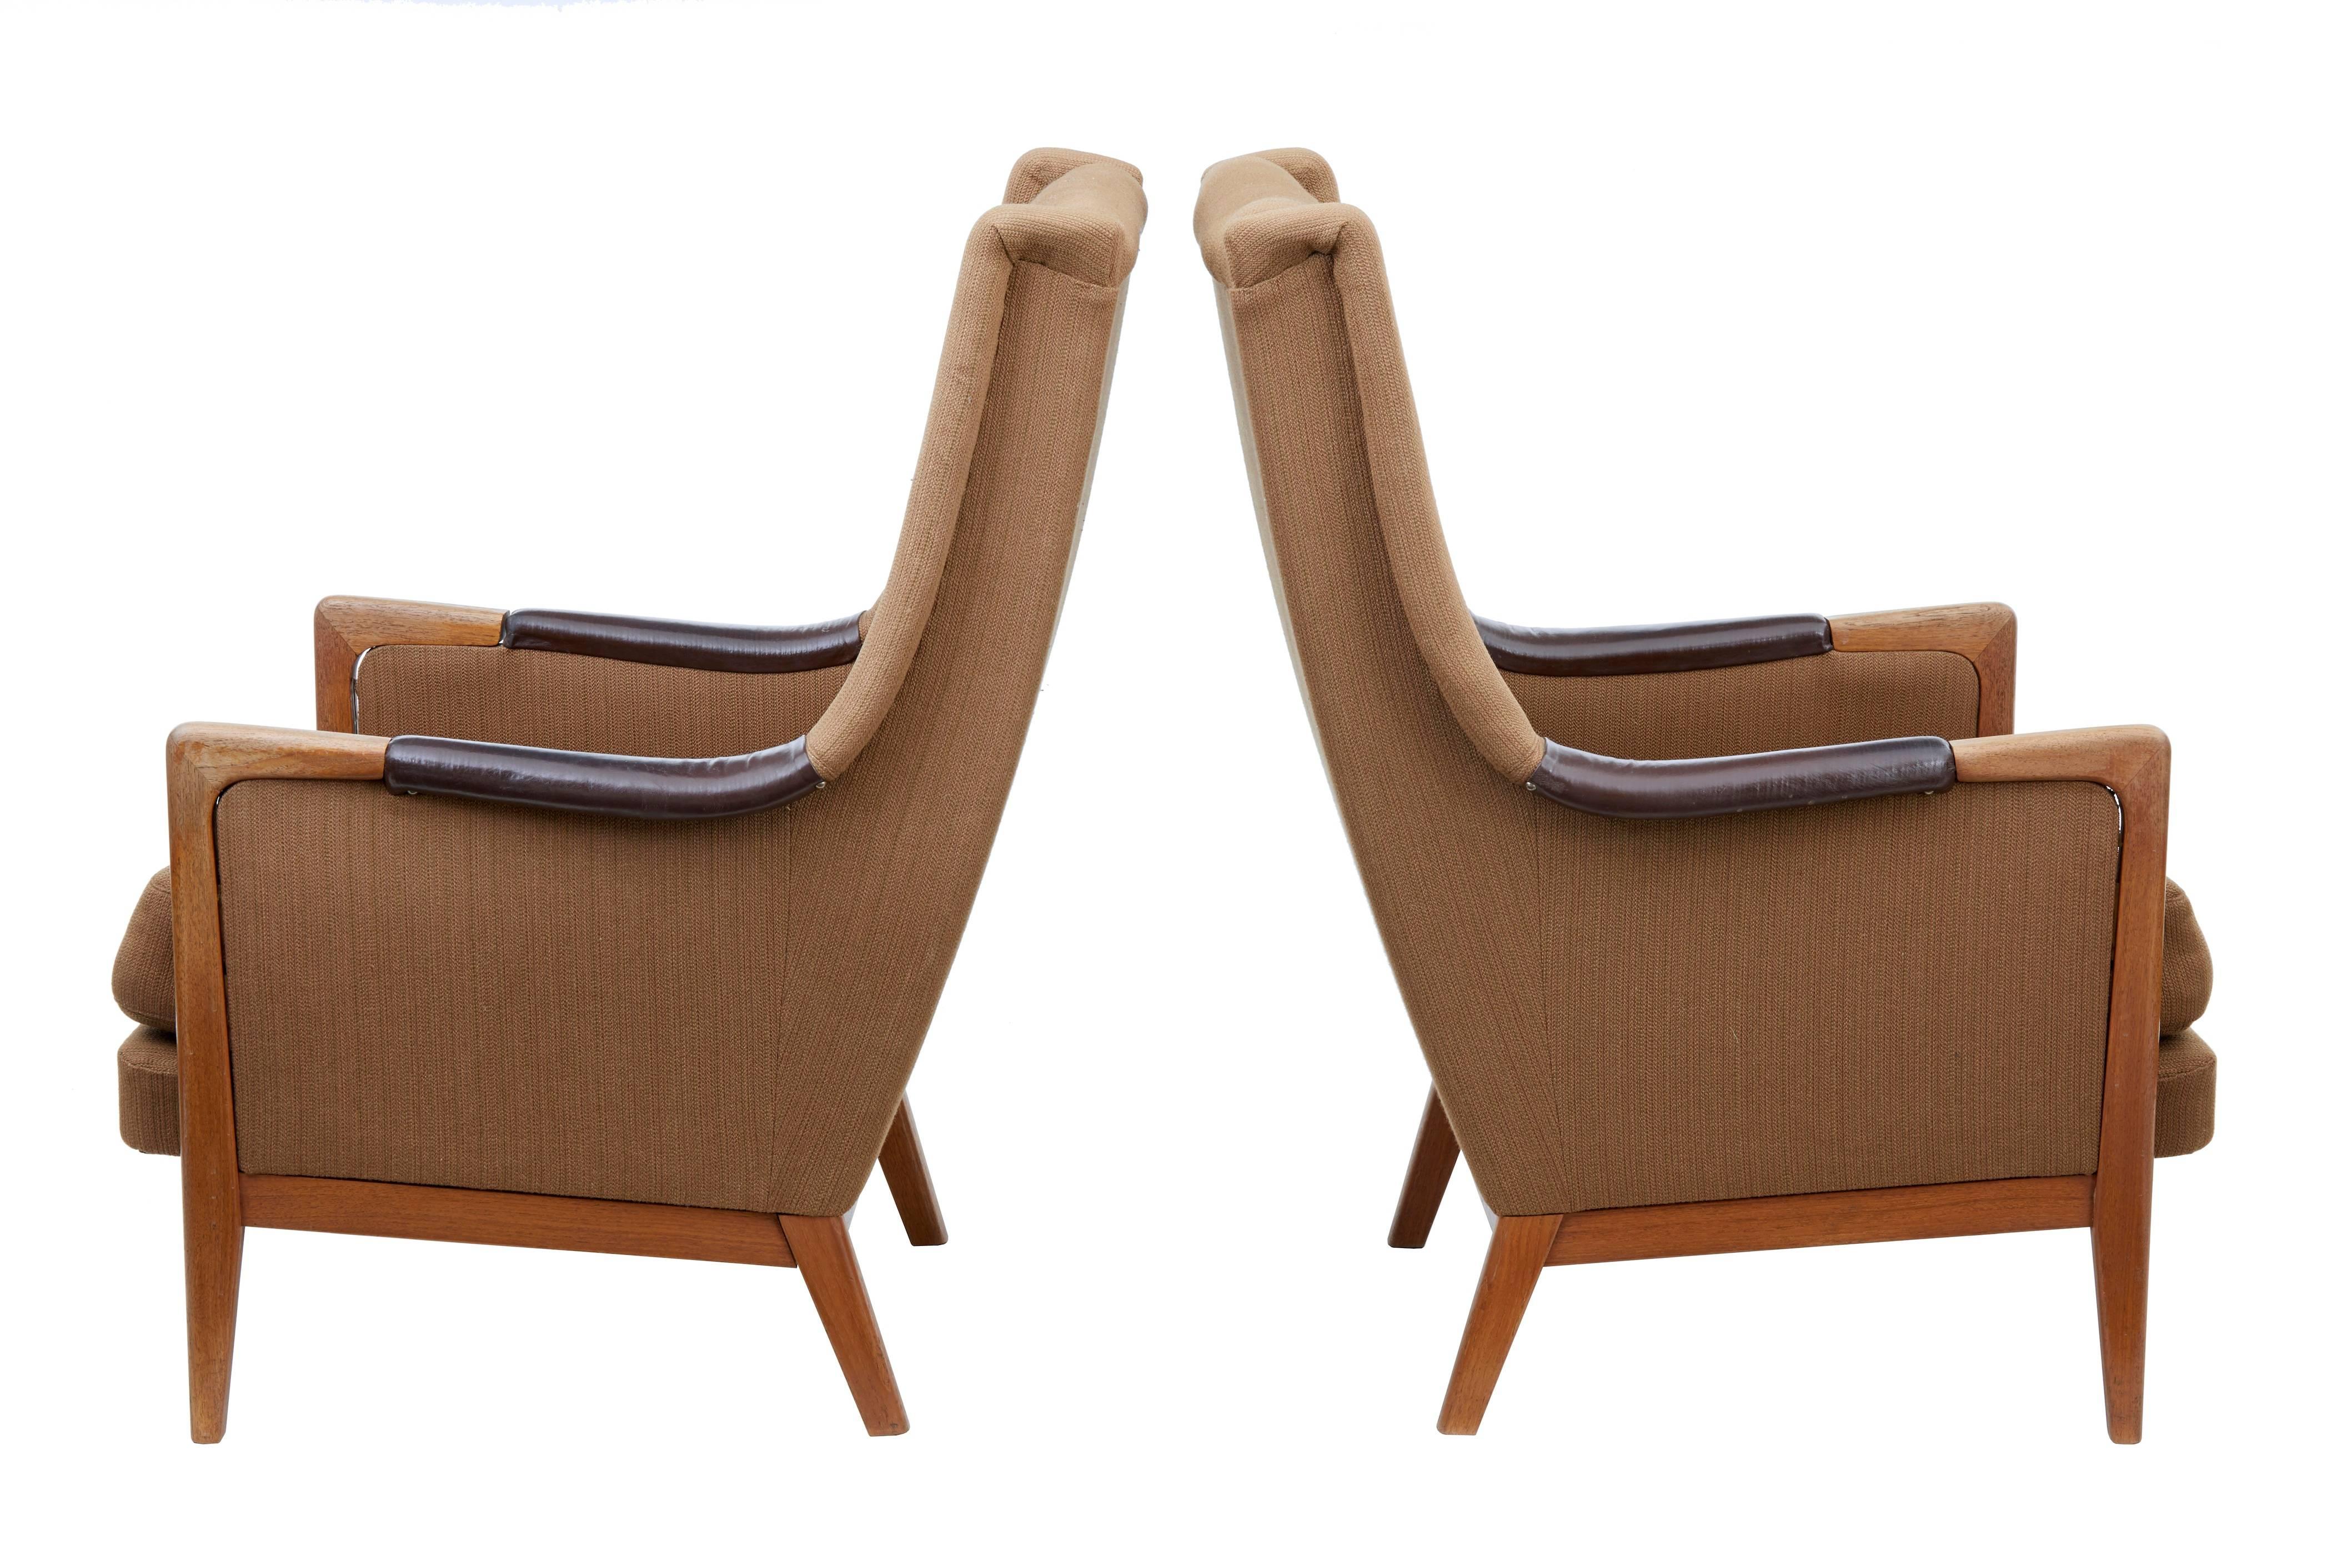 Pair of Danish teak modern armchairs, circa 1960.
Comfortable pair of modern armchairs. Button back seat and back.
Leather inserts to arms.
Teak show frame on the arm and legs.
Some fraying and pulls to fabric. Some fading to